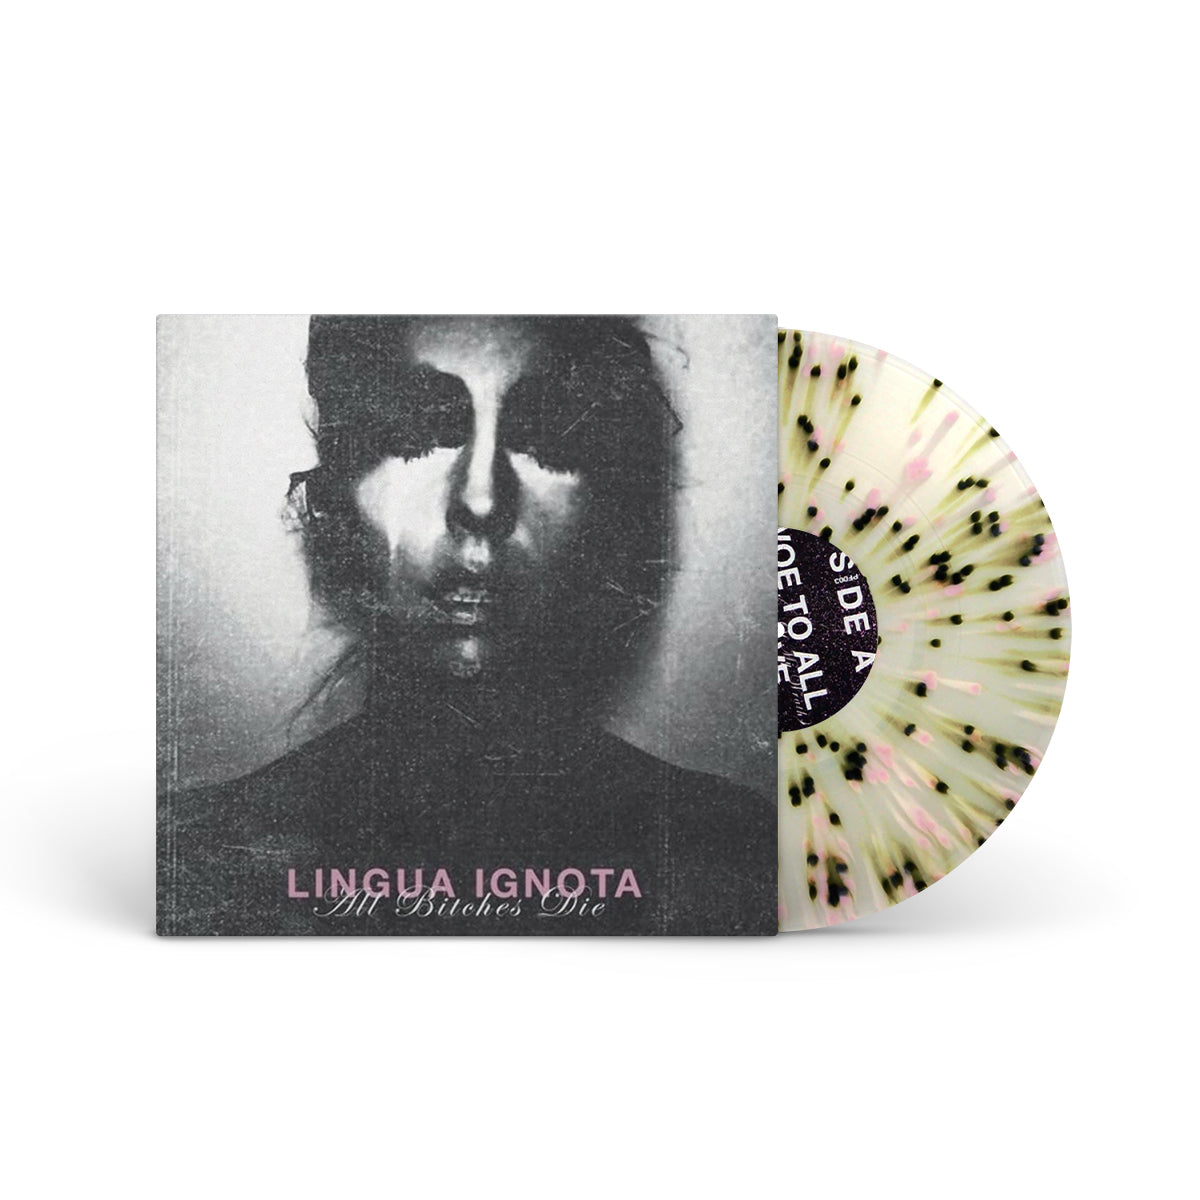 LINGUA IGNOTA "All Bitches Die" LP